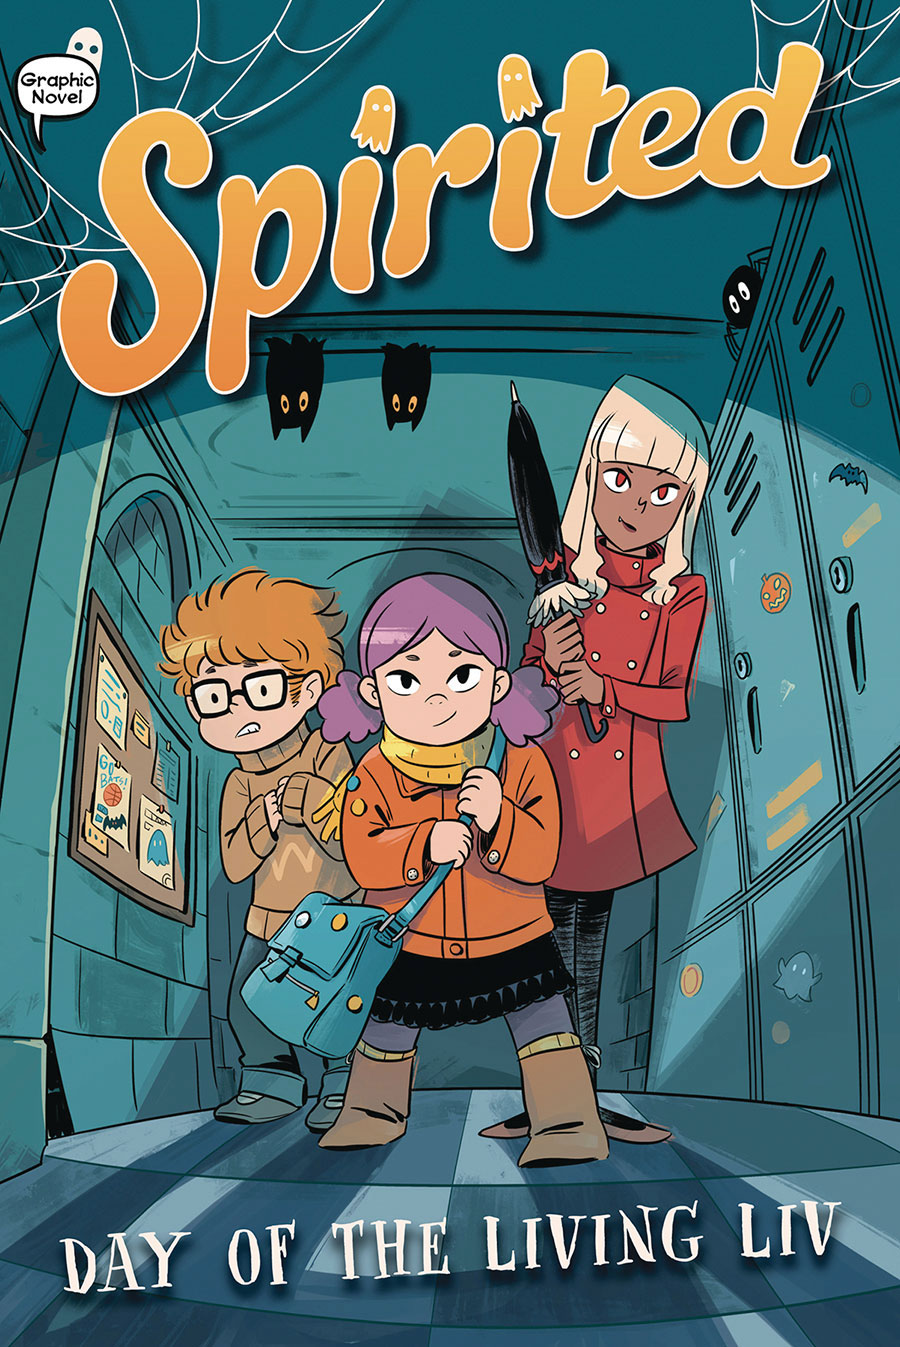 Spirited Vol 1 Day Of The Living Liv TP